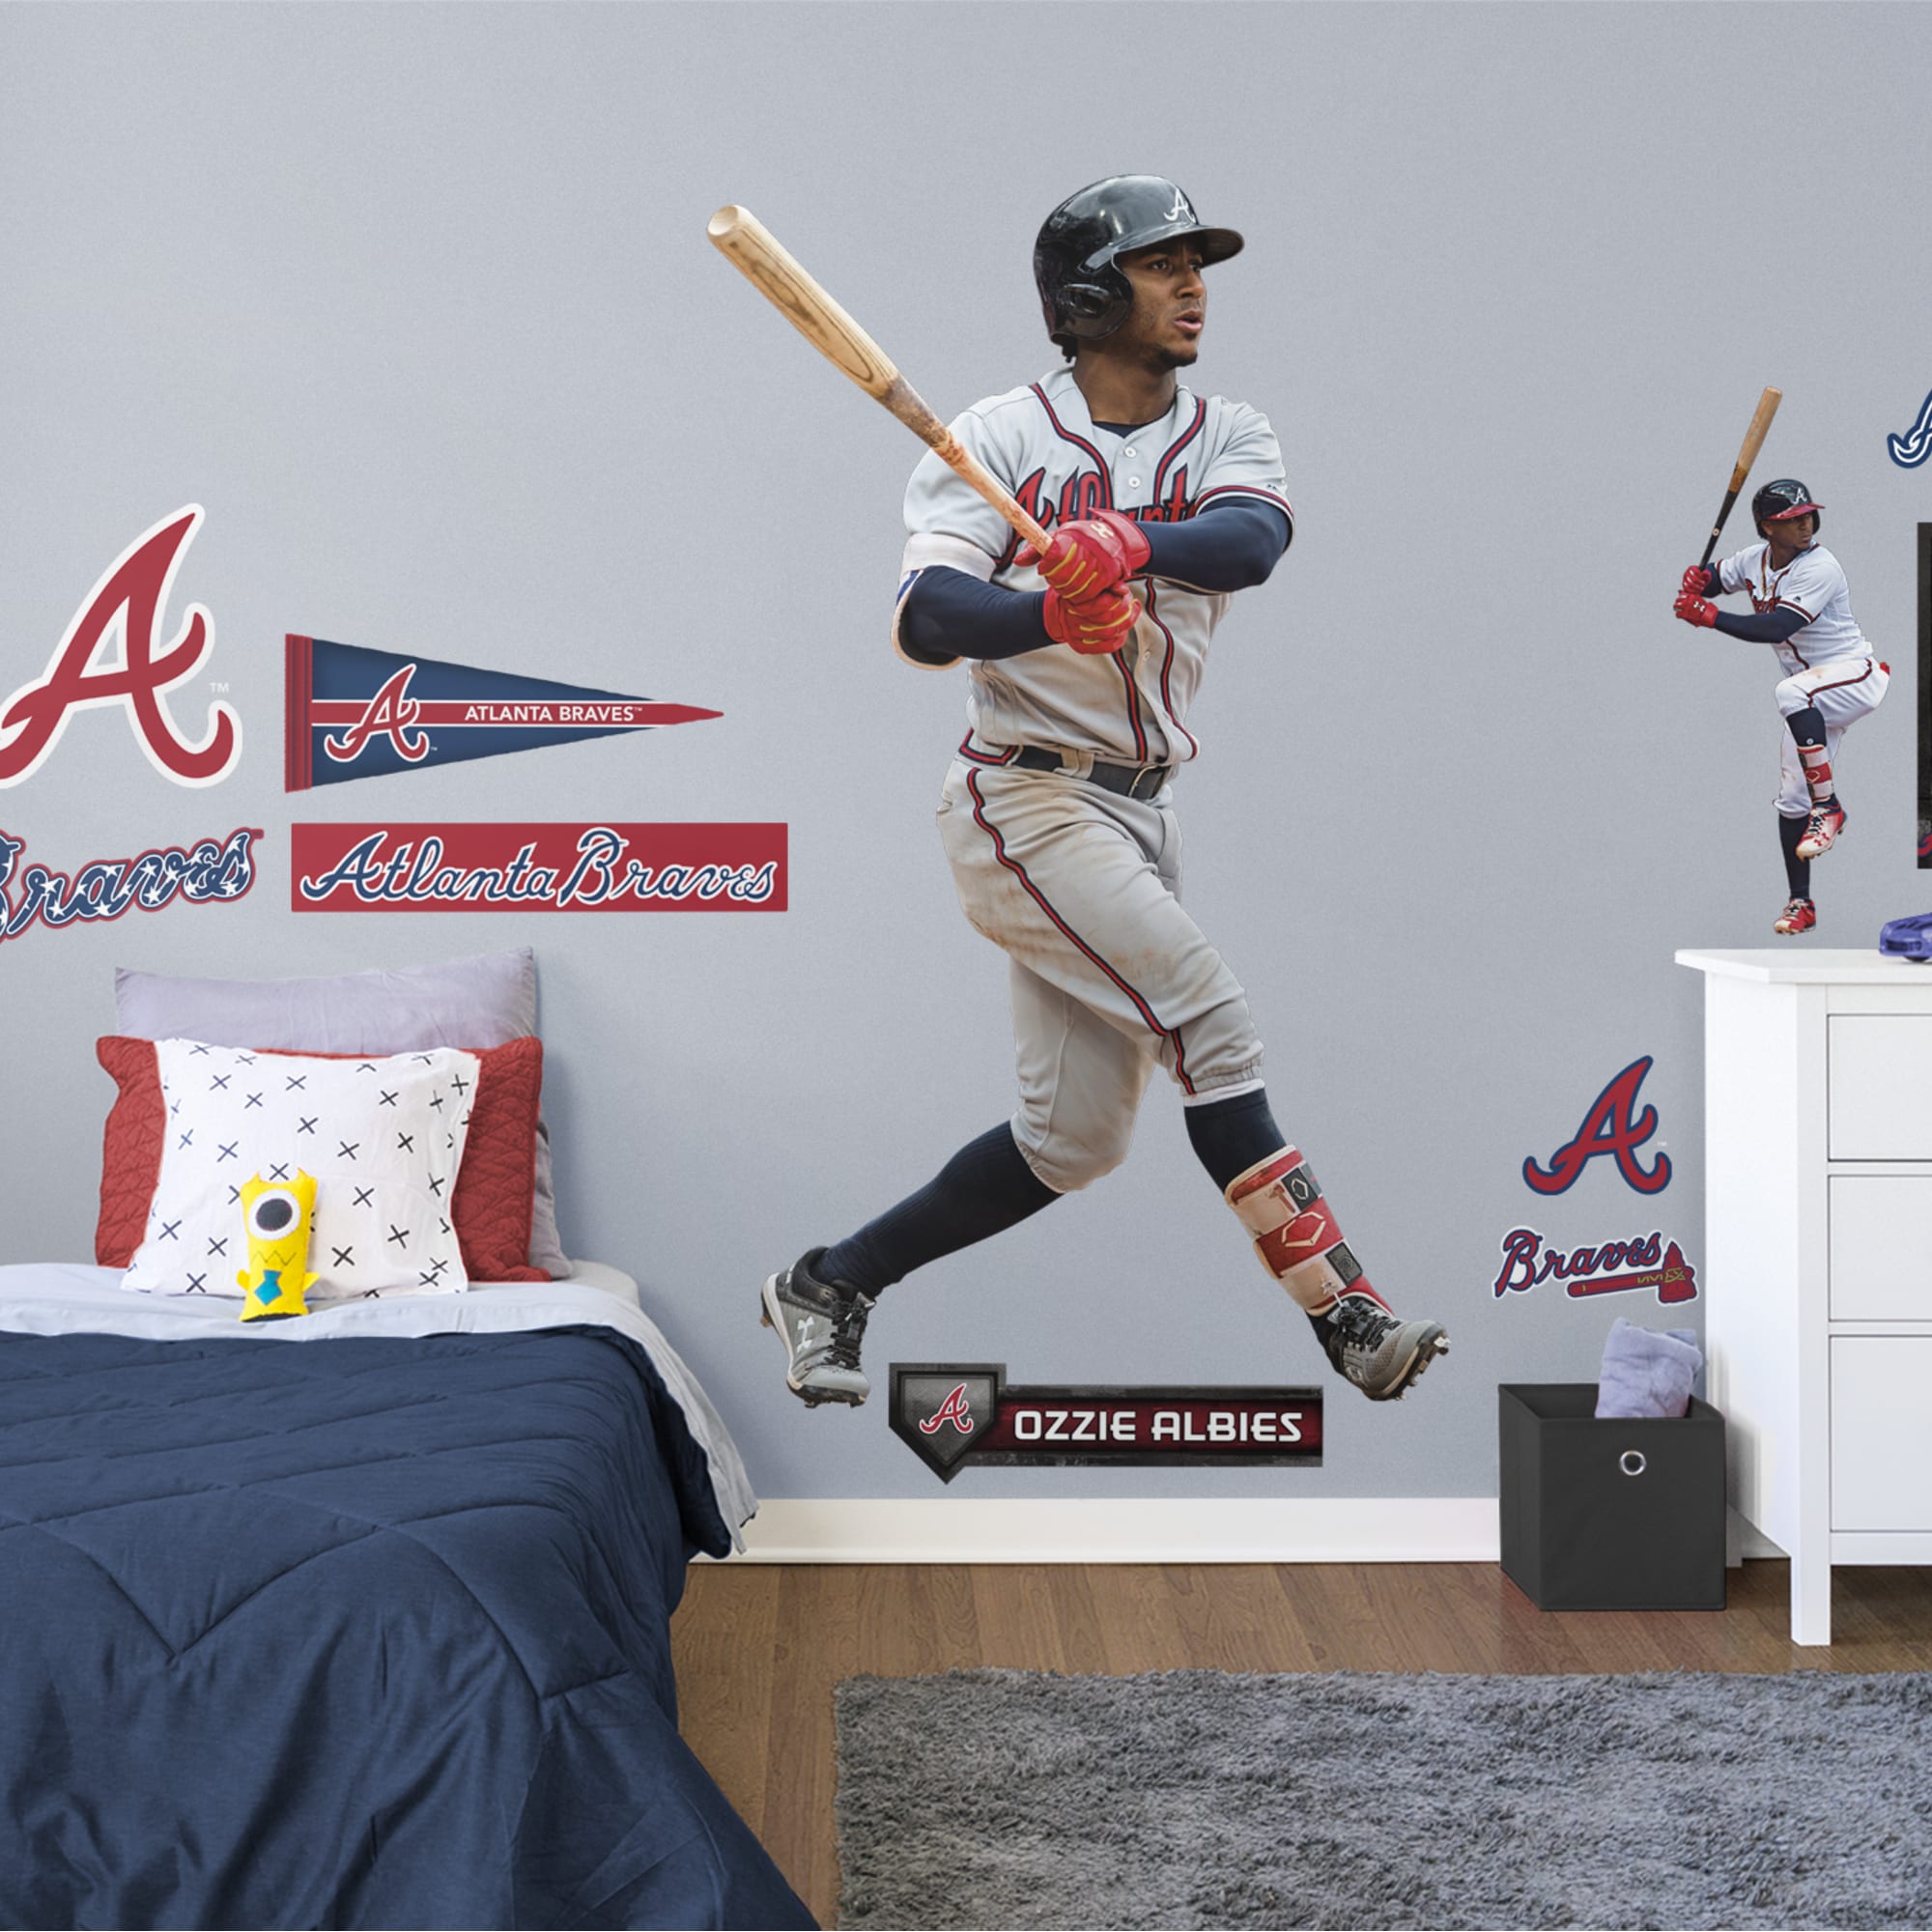 Ozzie Albies for Atlanta Braves - Officially Licensed MLB Removable Wall Decal Life-Size Athlete + 12 Decals (44"W x 77"H) by Fa